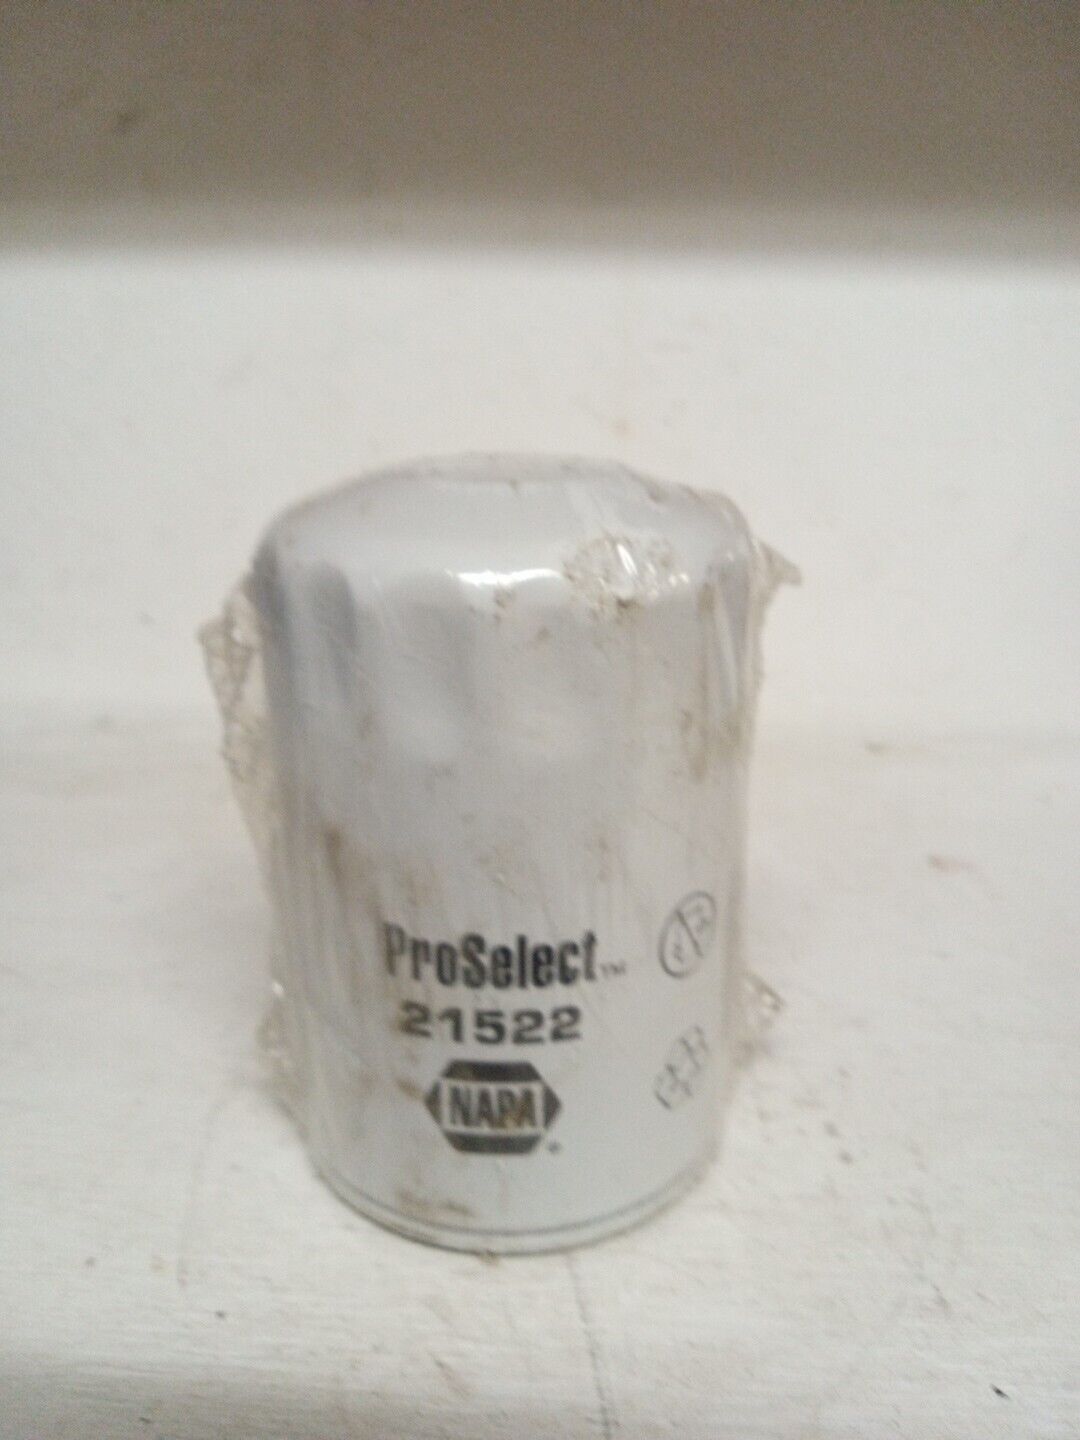 Napa ProSelect Oil Filter #21522 FREE SHIPPING